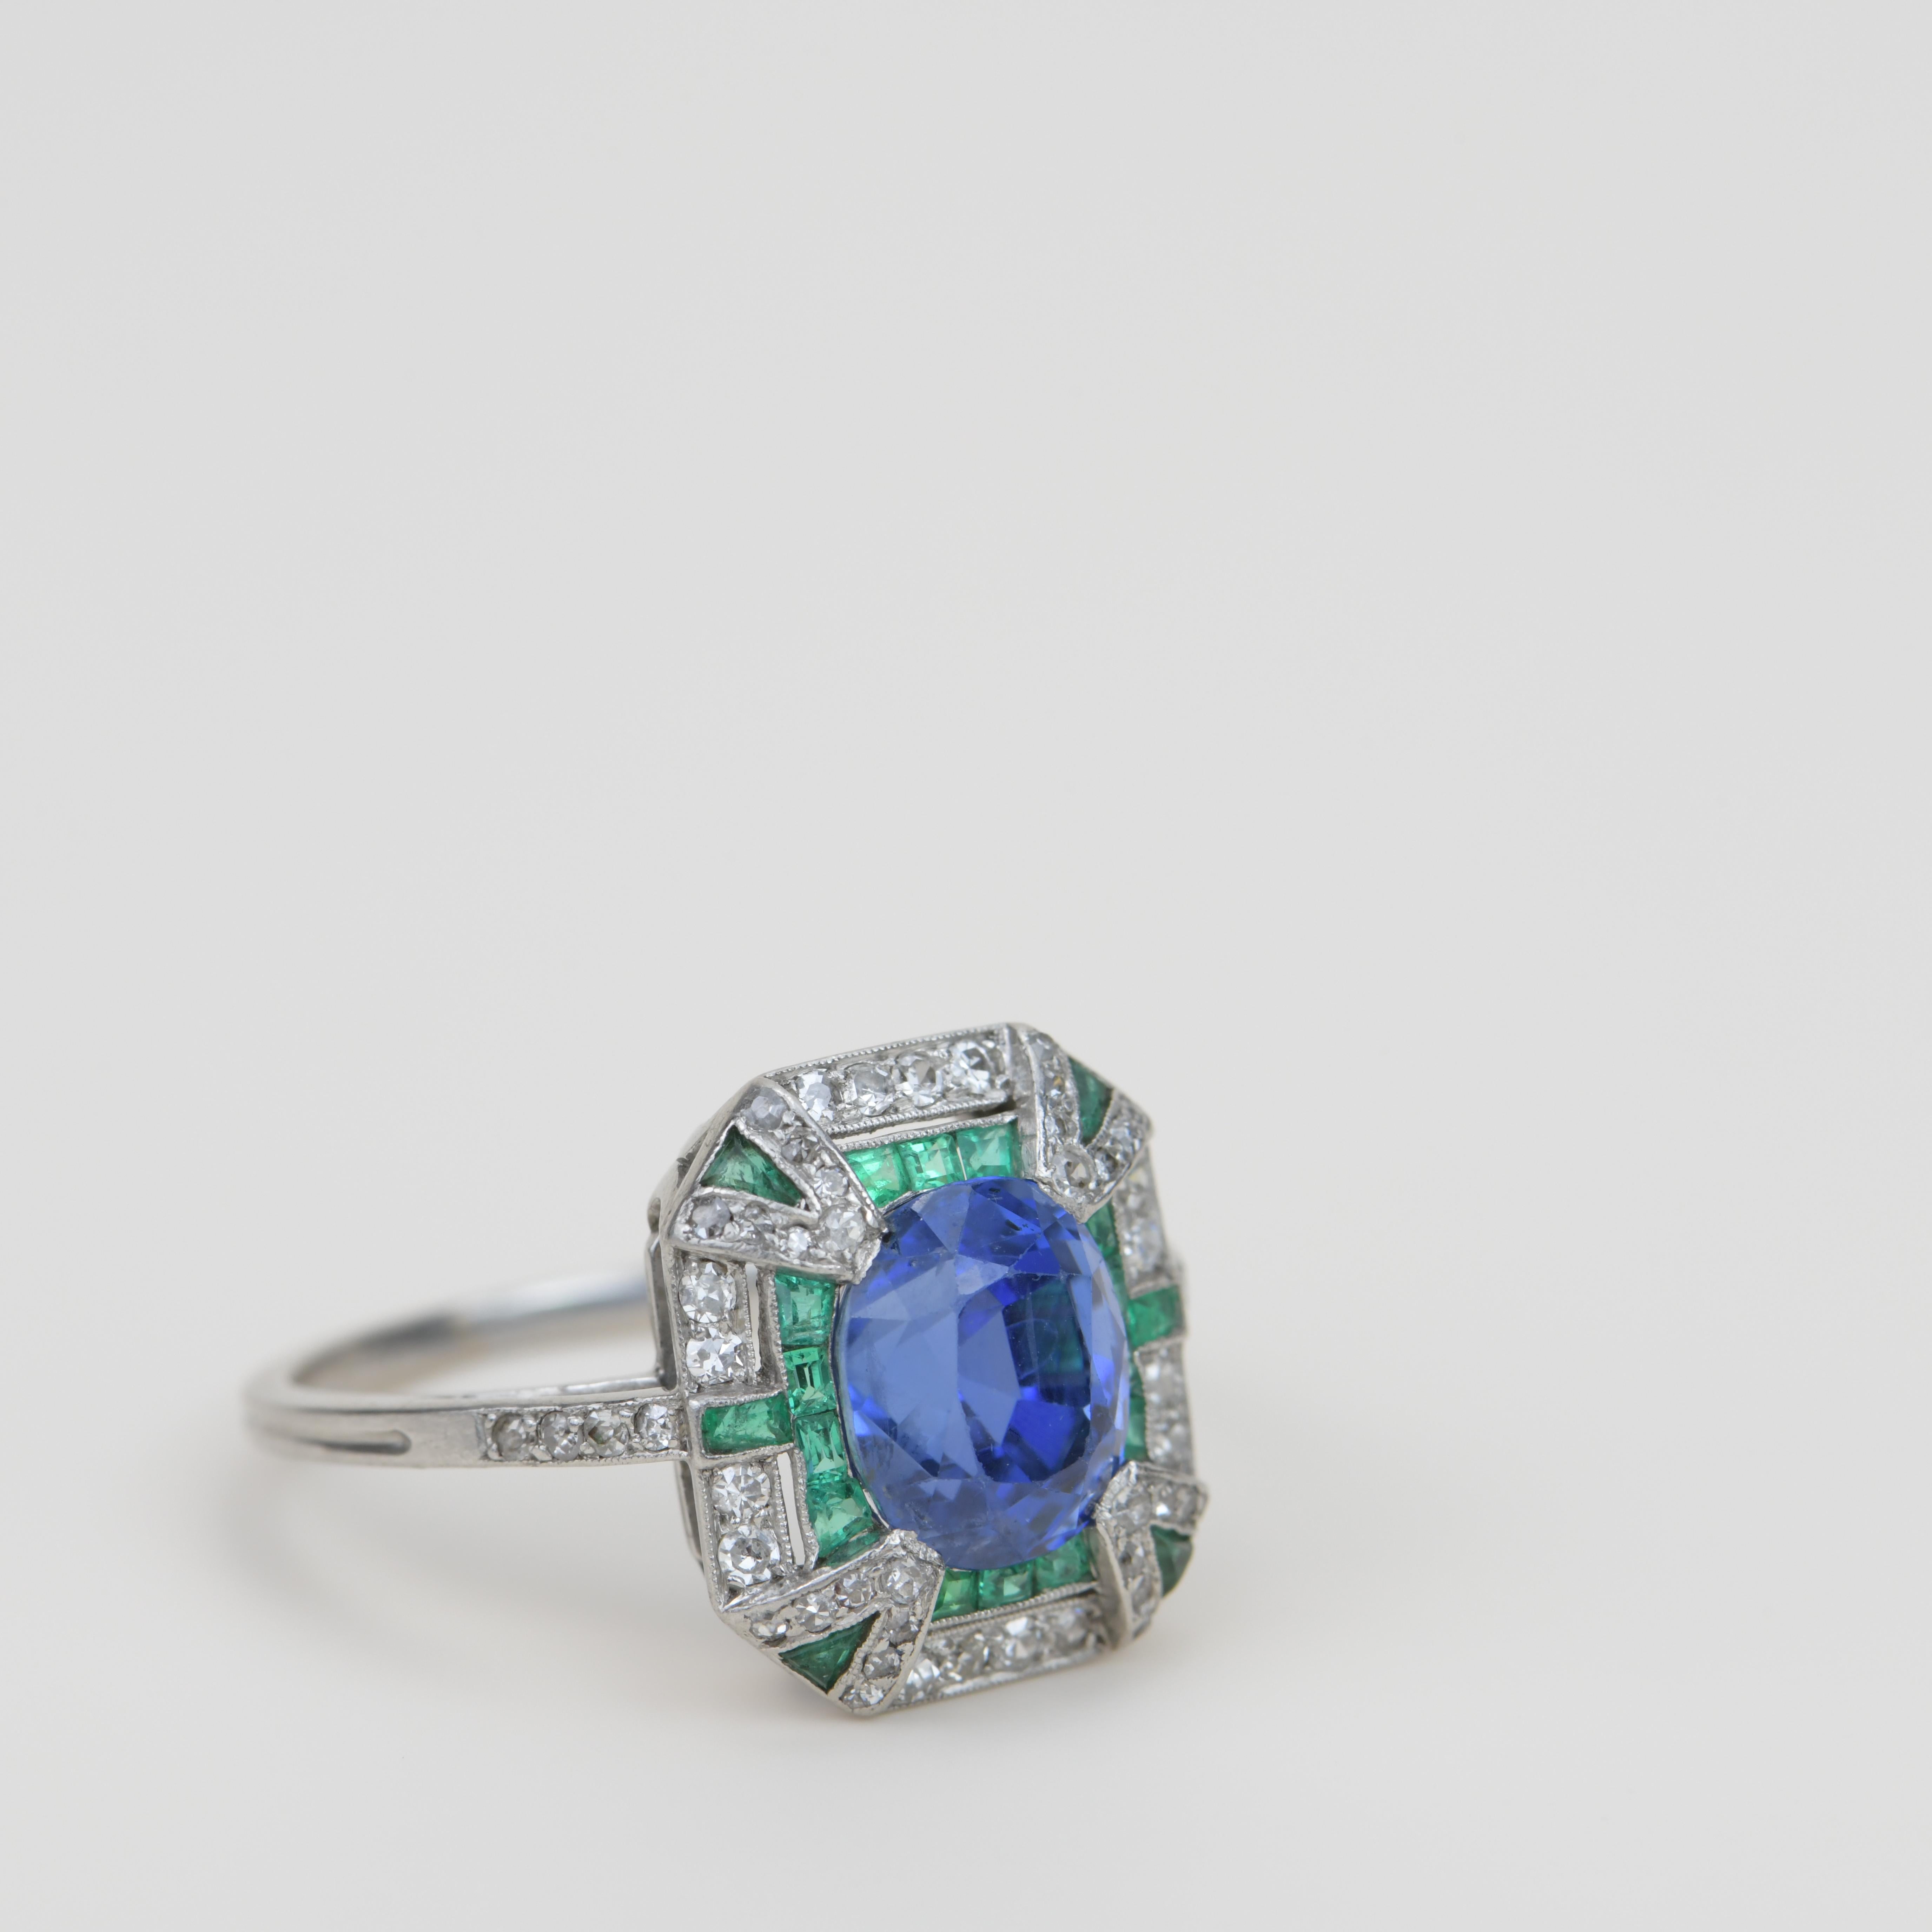 Edwardian Platinum 3.7 Carat Sapphire Emerald Diamond Ring In Excellent Condition For Sale In Banbury, GB